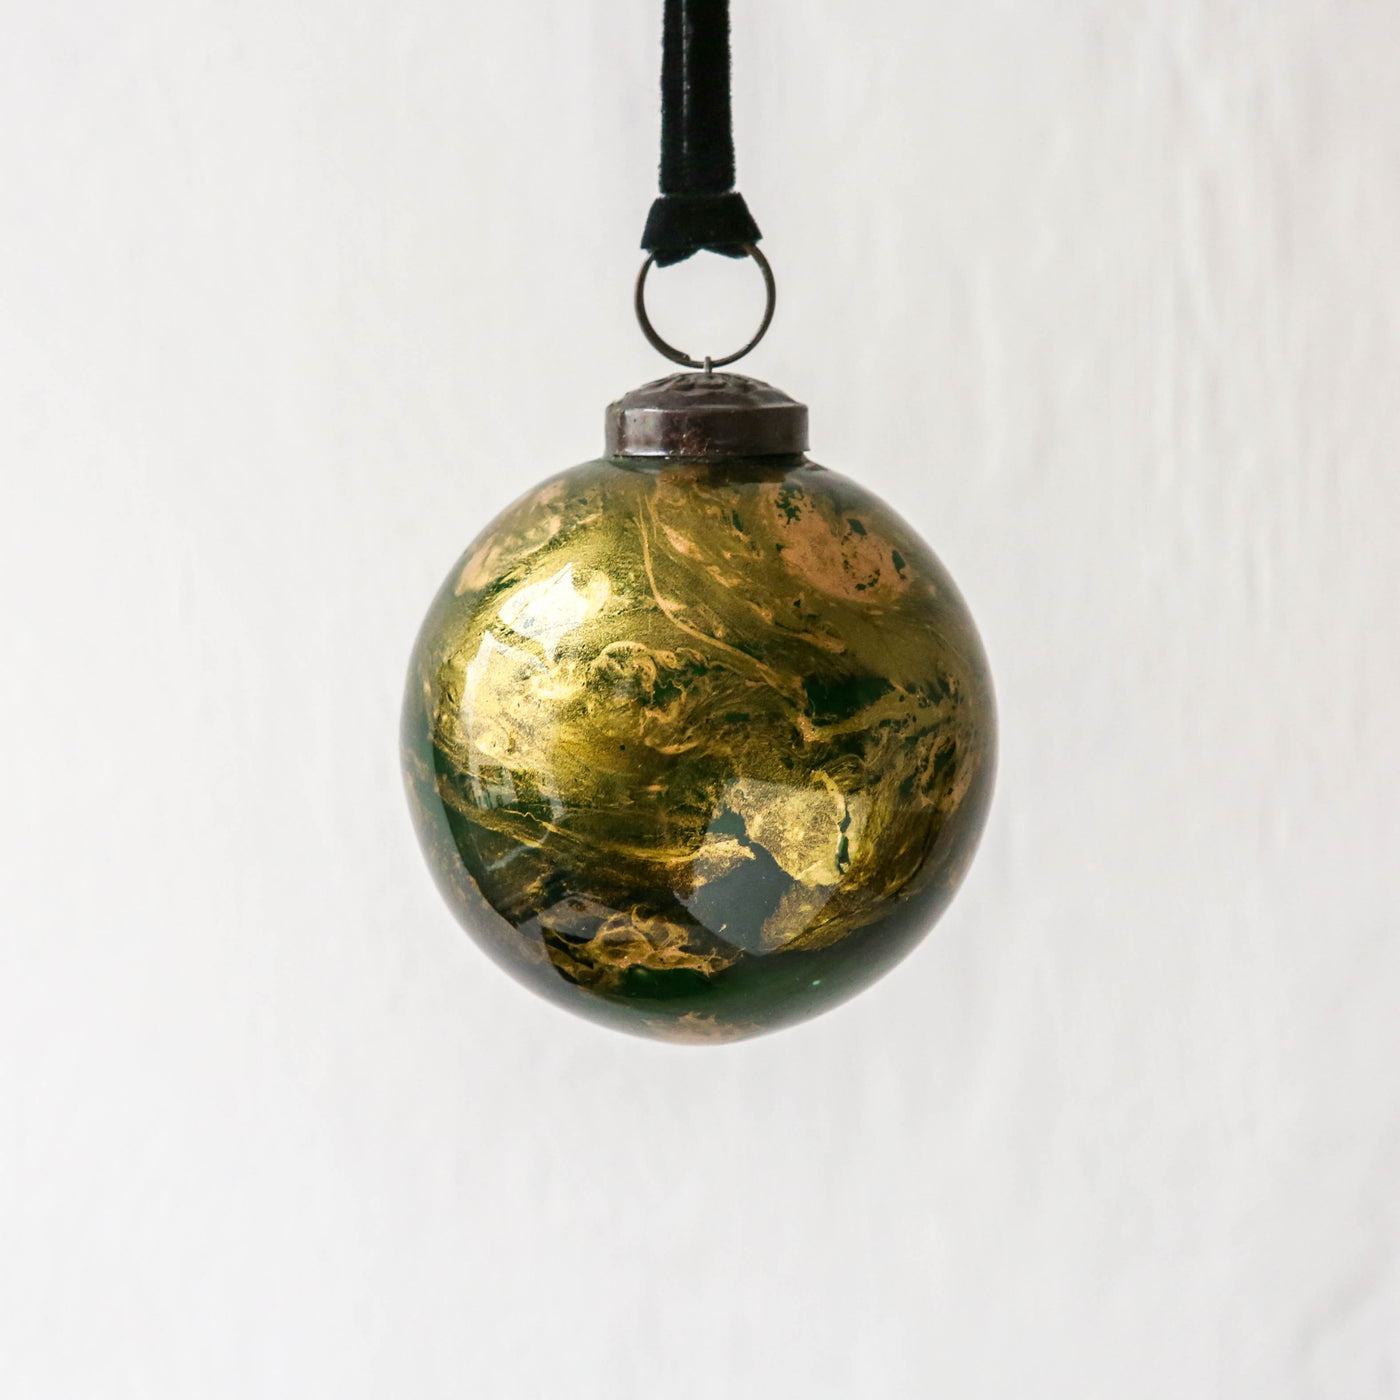 8cm Marbled Glass Bauble - Emerald